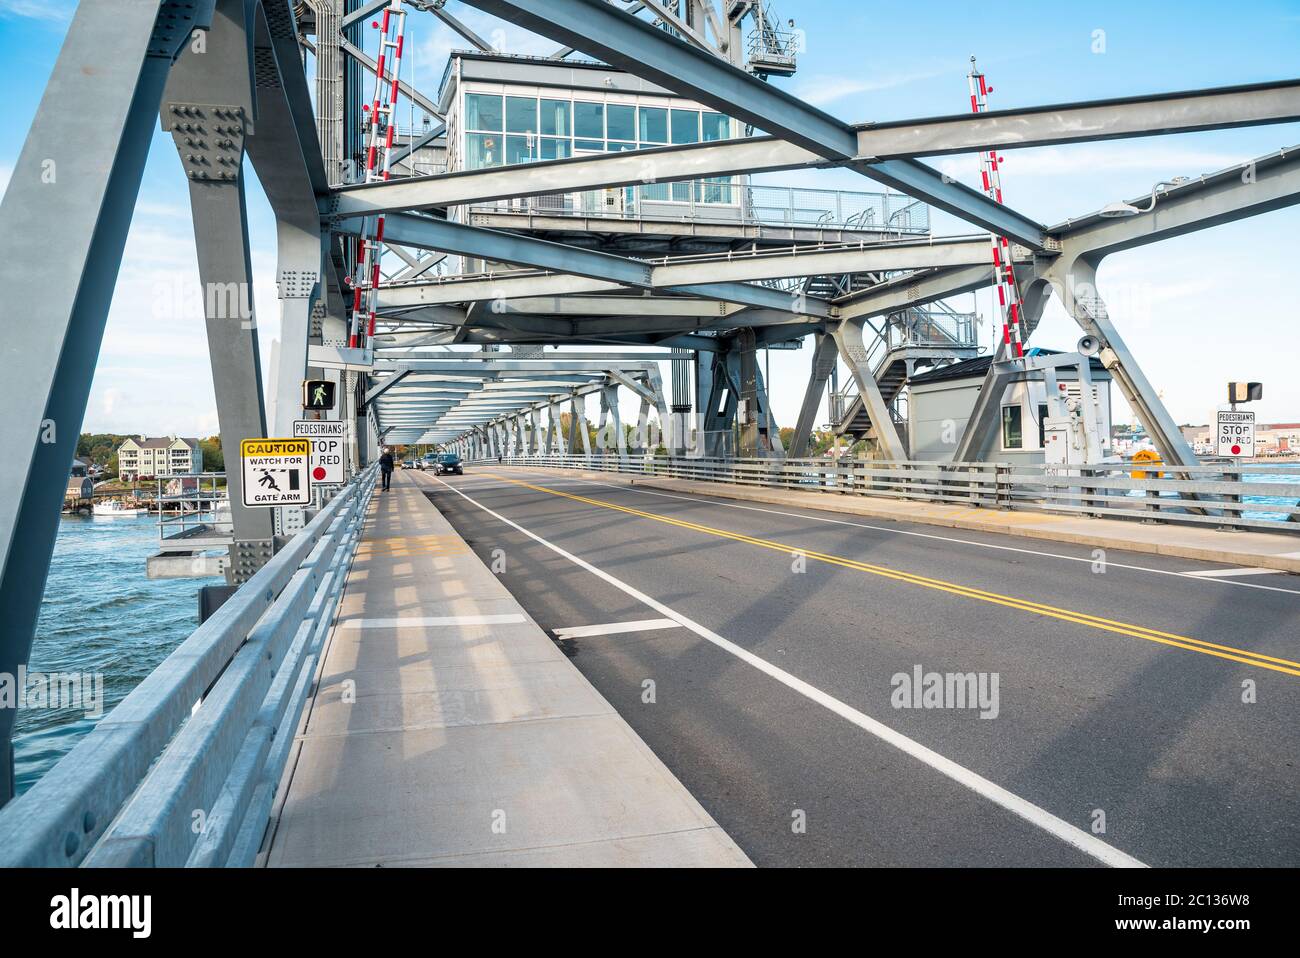 Steel vertical lift road bridge spanning a might river on a clear sutumn day Stock Photo